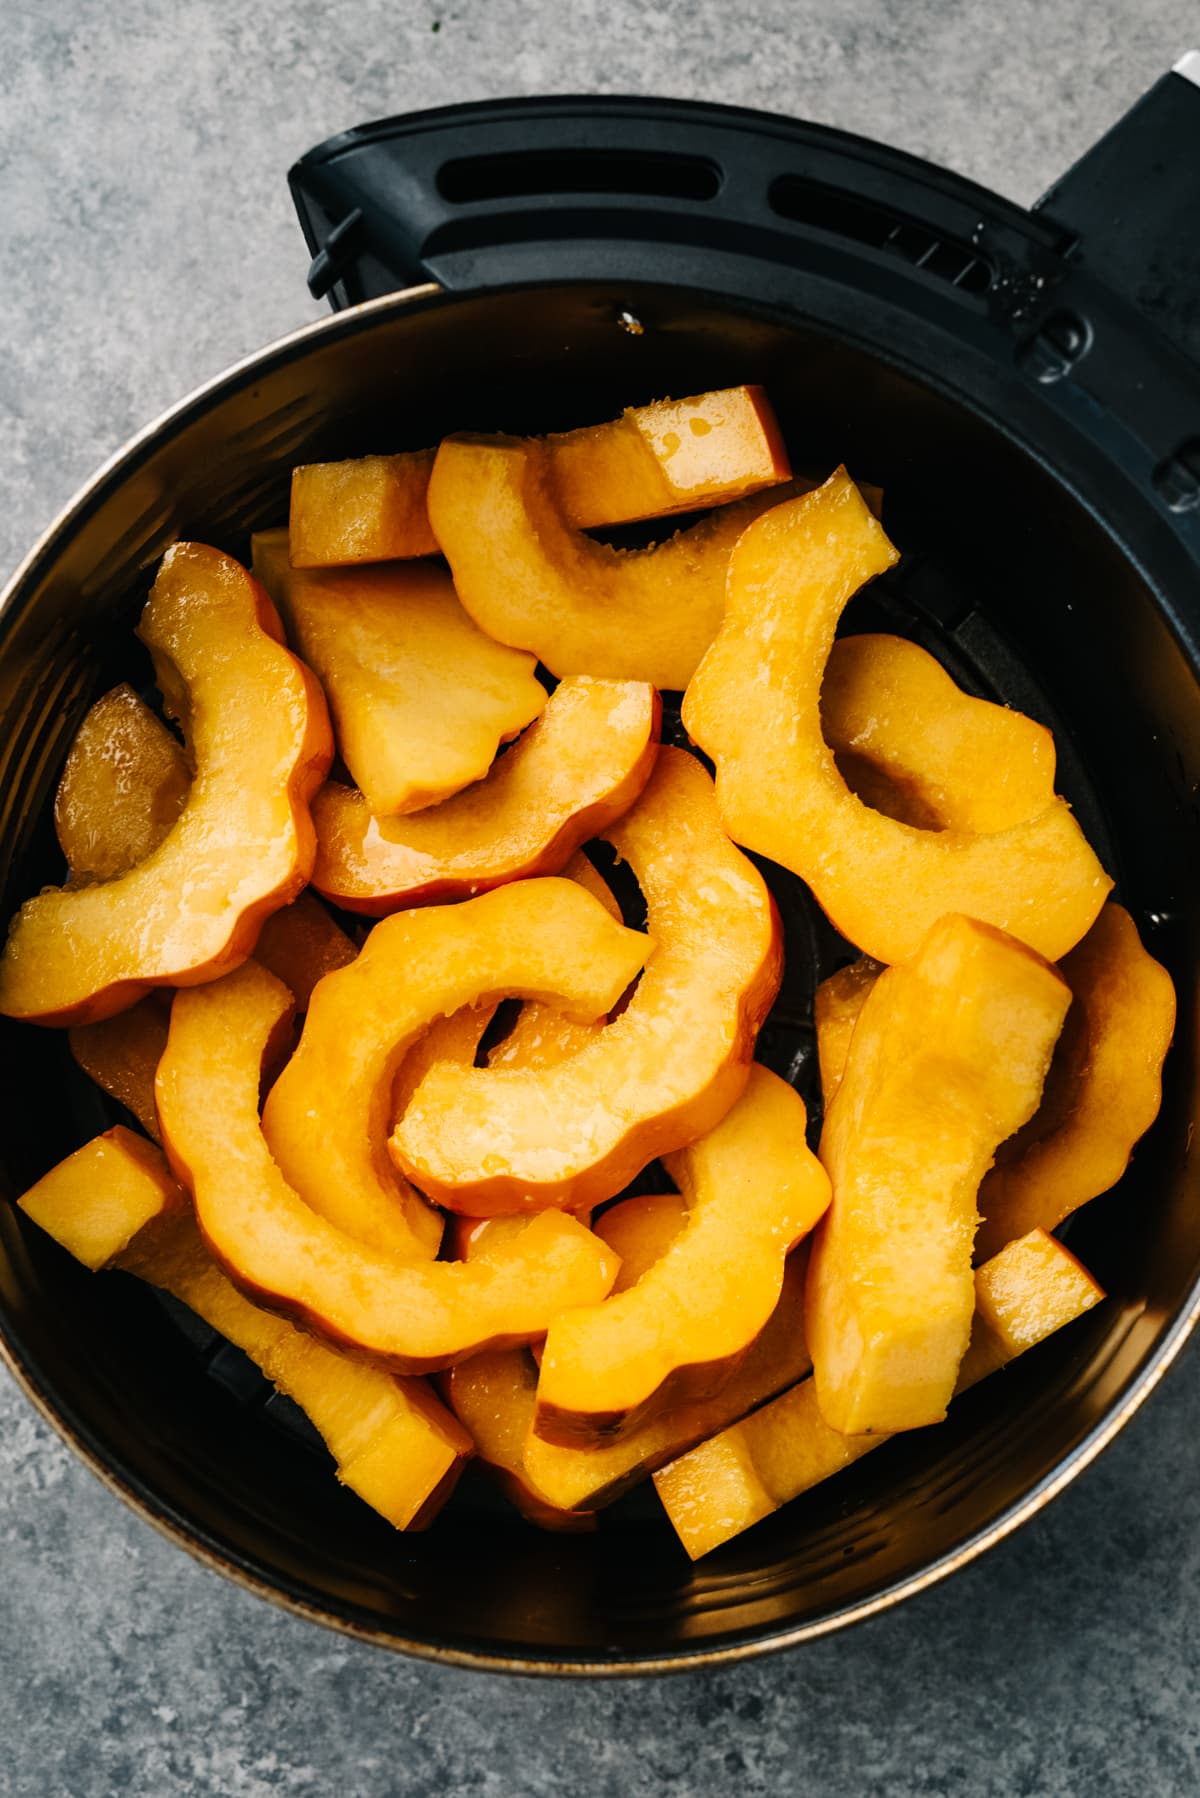 Sliced acorn squash tossed with olive oil and salt in the basket of an air fryer.